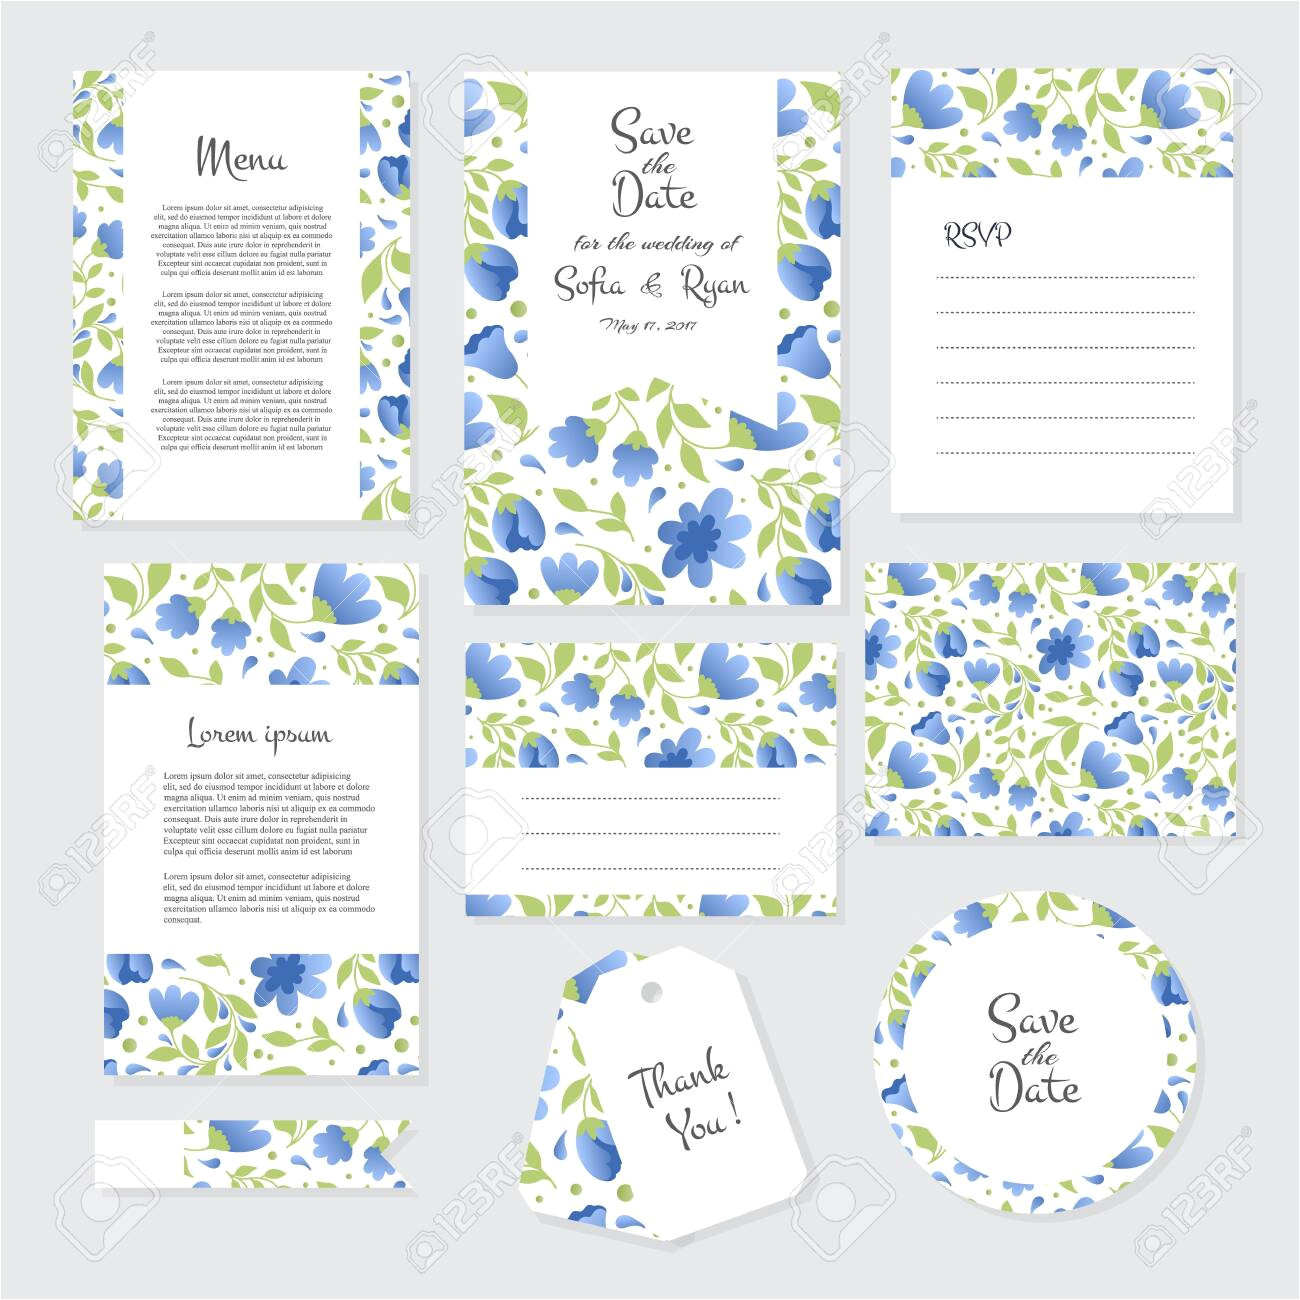 123397476 vector gentle wedding cards template with flower design invitation or save the date rsvp menu and th jpg